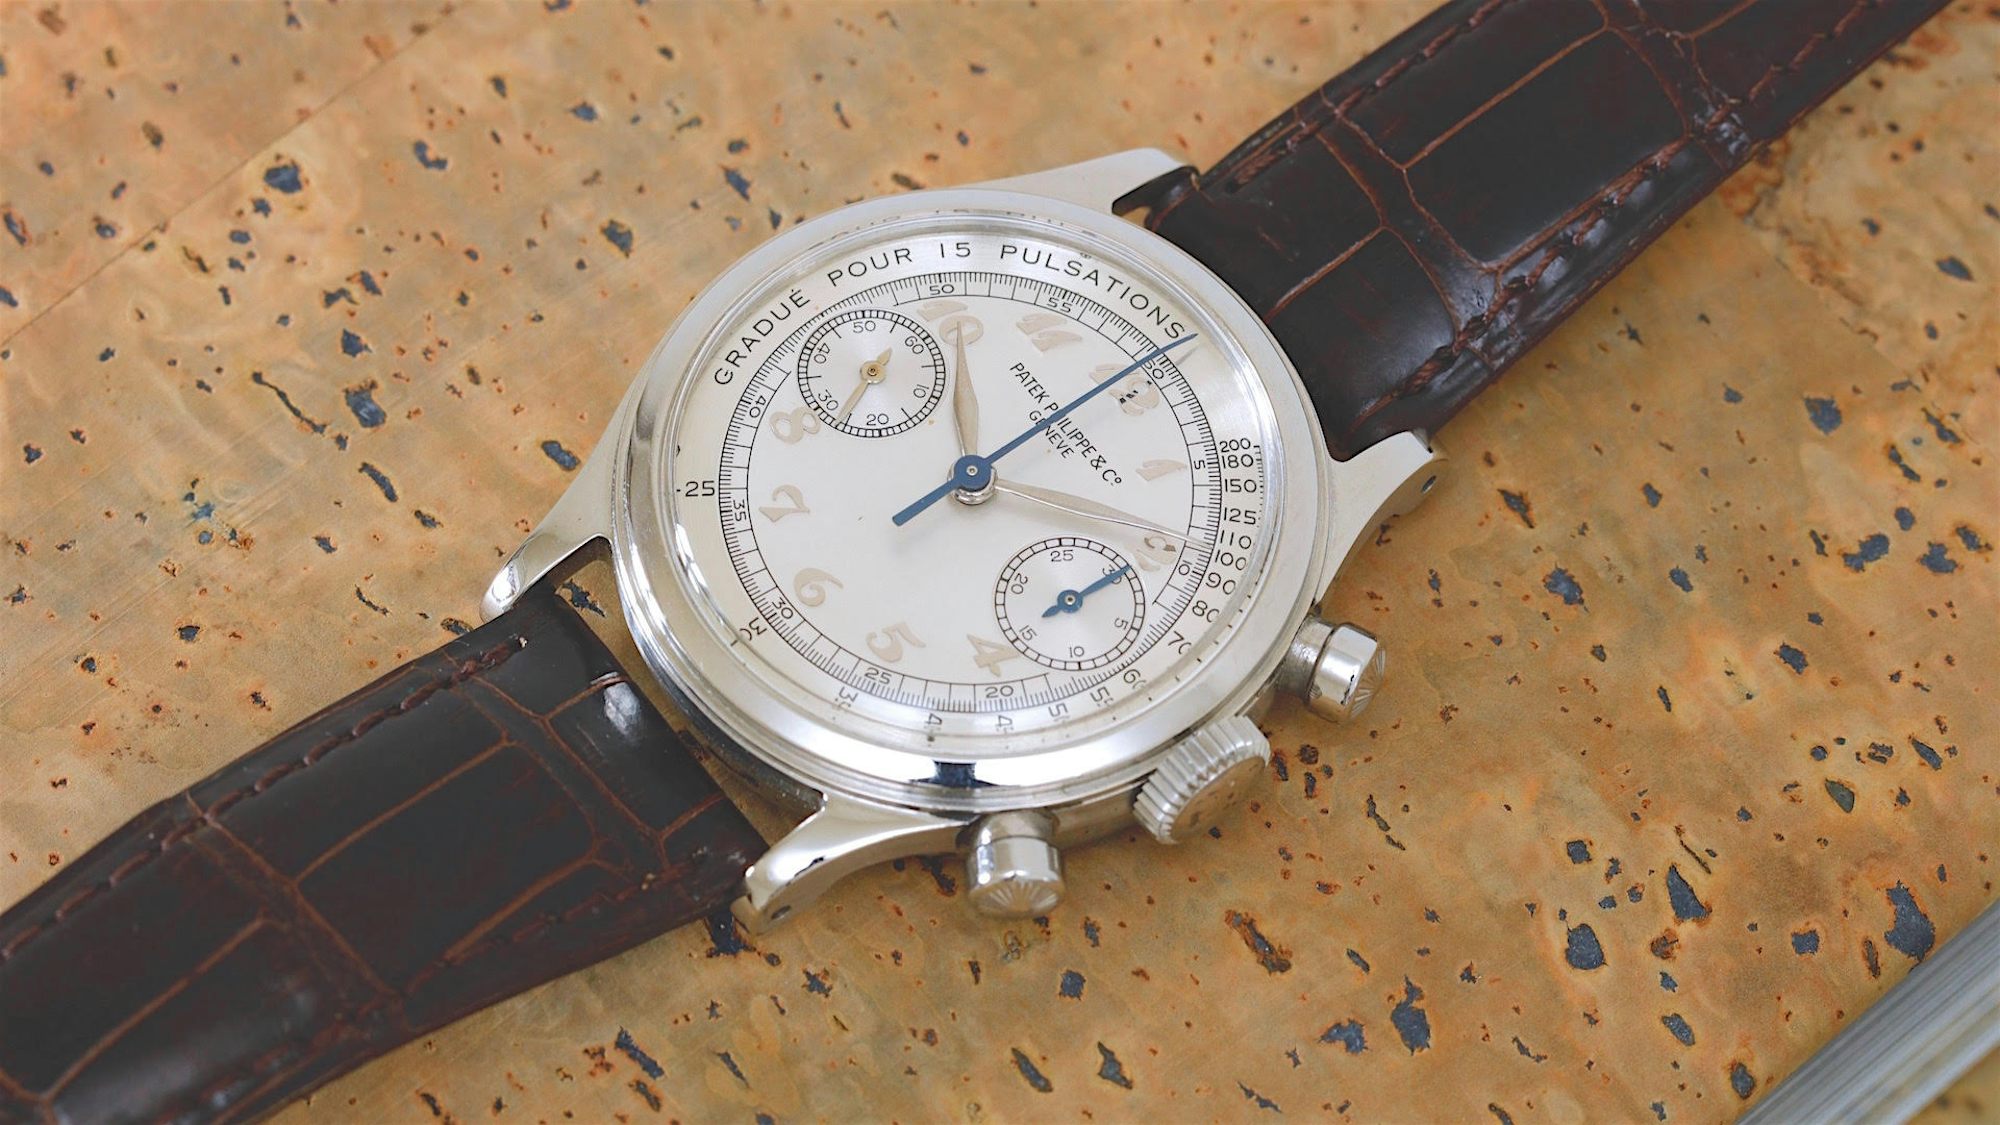 Hodinkee Bring A Loupe A Stainless Steel Patek Philippe Ref 1463 A 